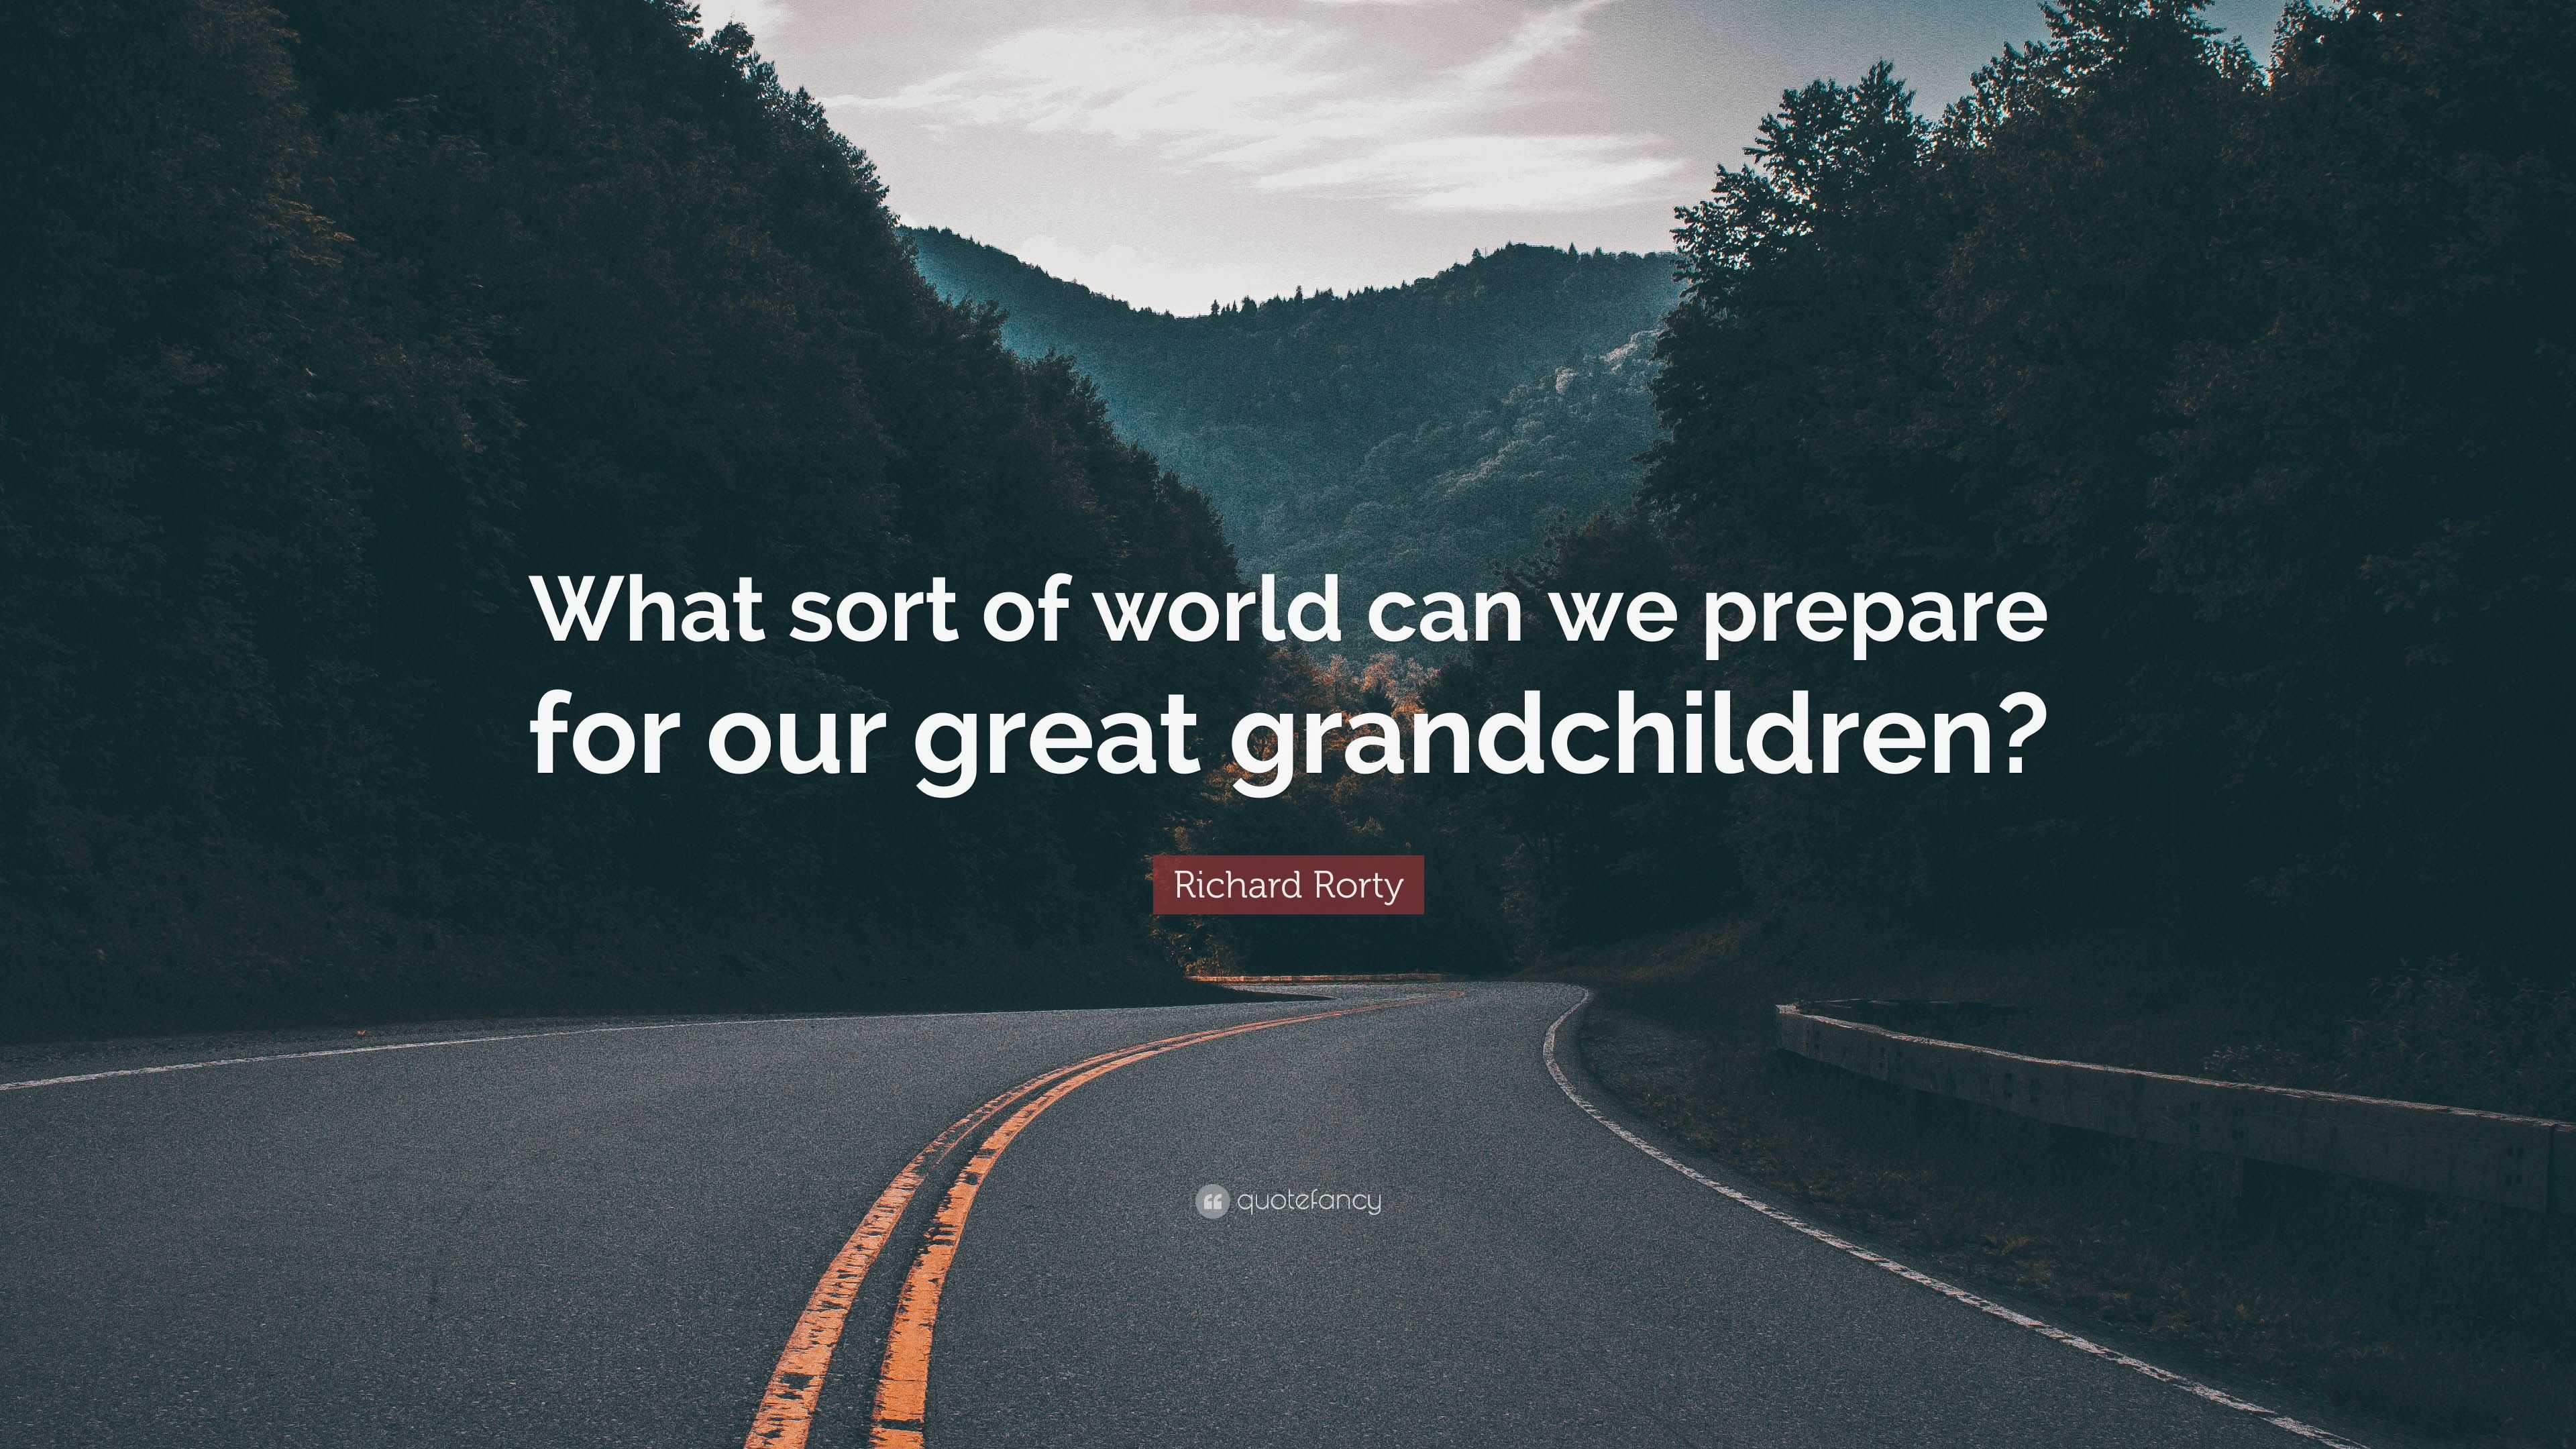 Richard Rorty Quote “what Sort Of World Can We Prepare For Our Great